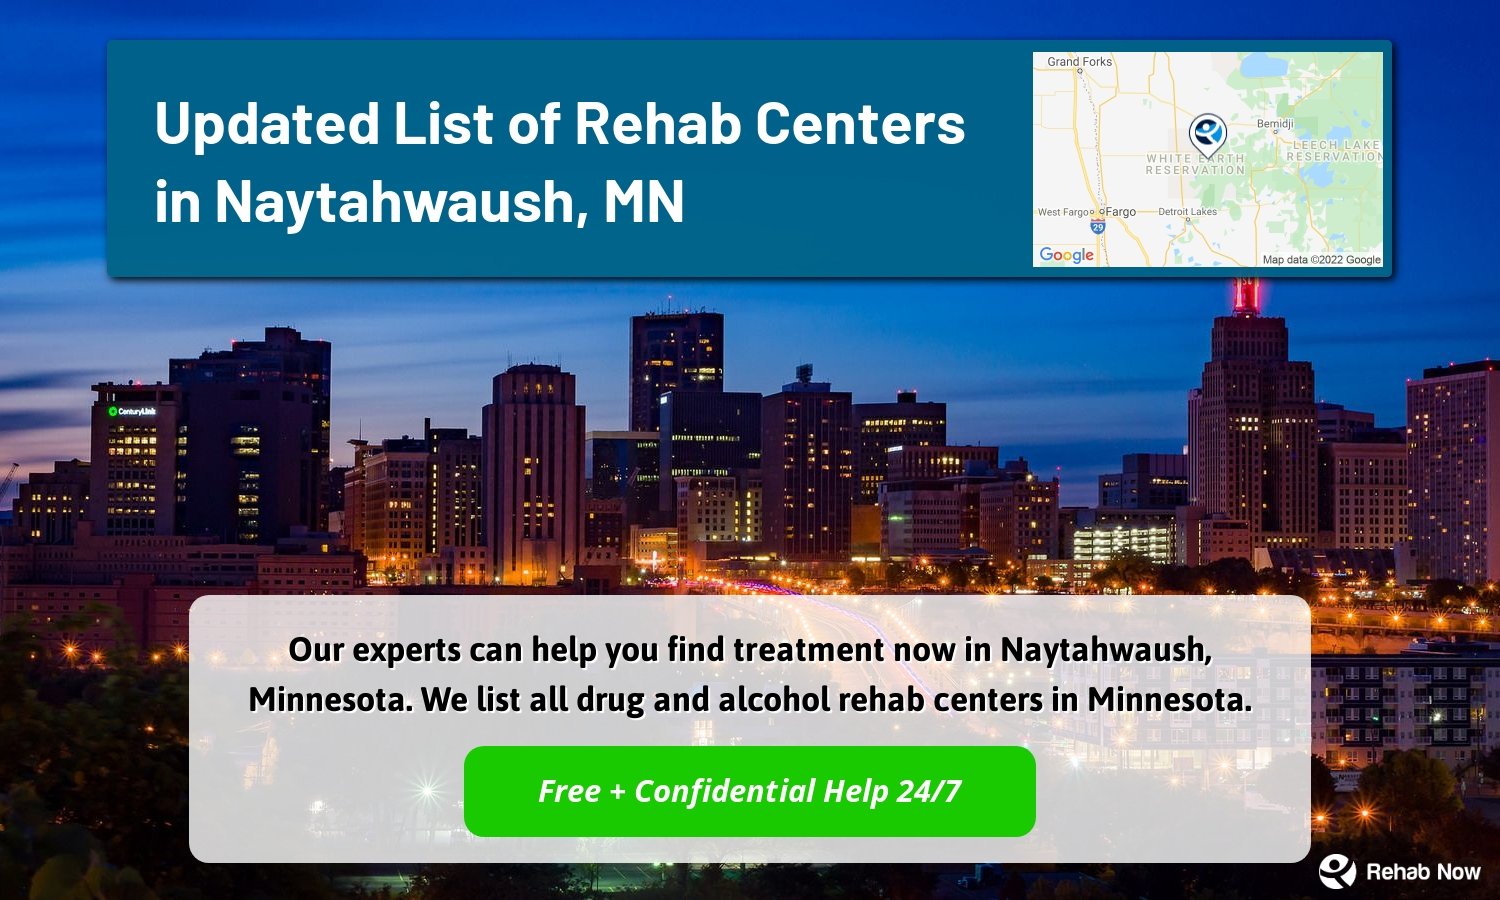 Our experts can help you find treatment now in Naytahwaush, Minnesota. We list all drug and alcohol rehab centers in Minnesota.